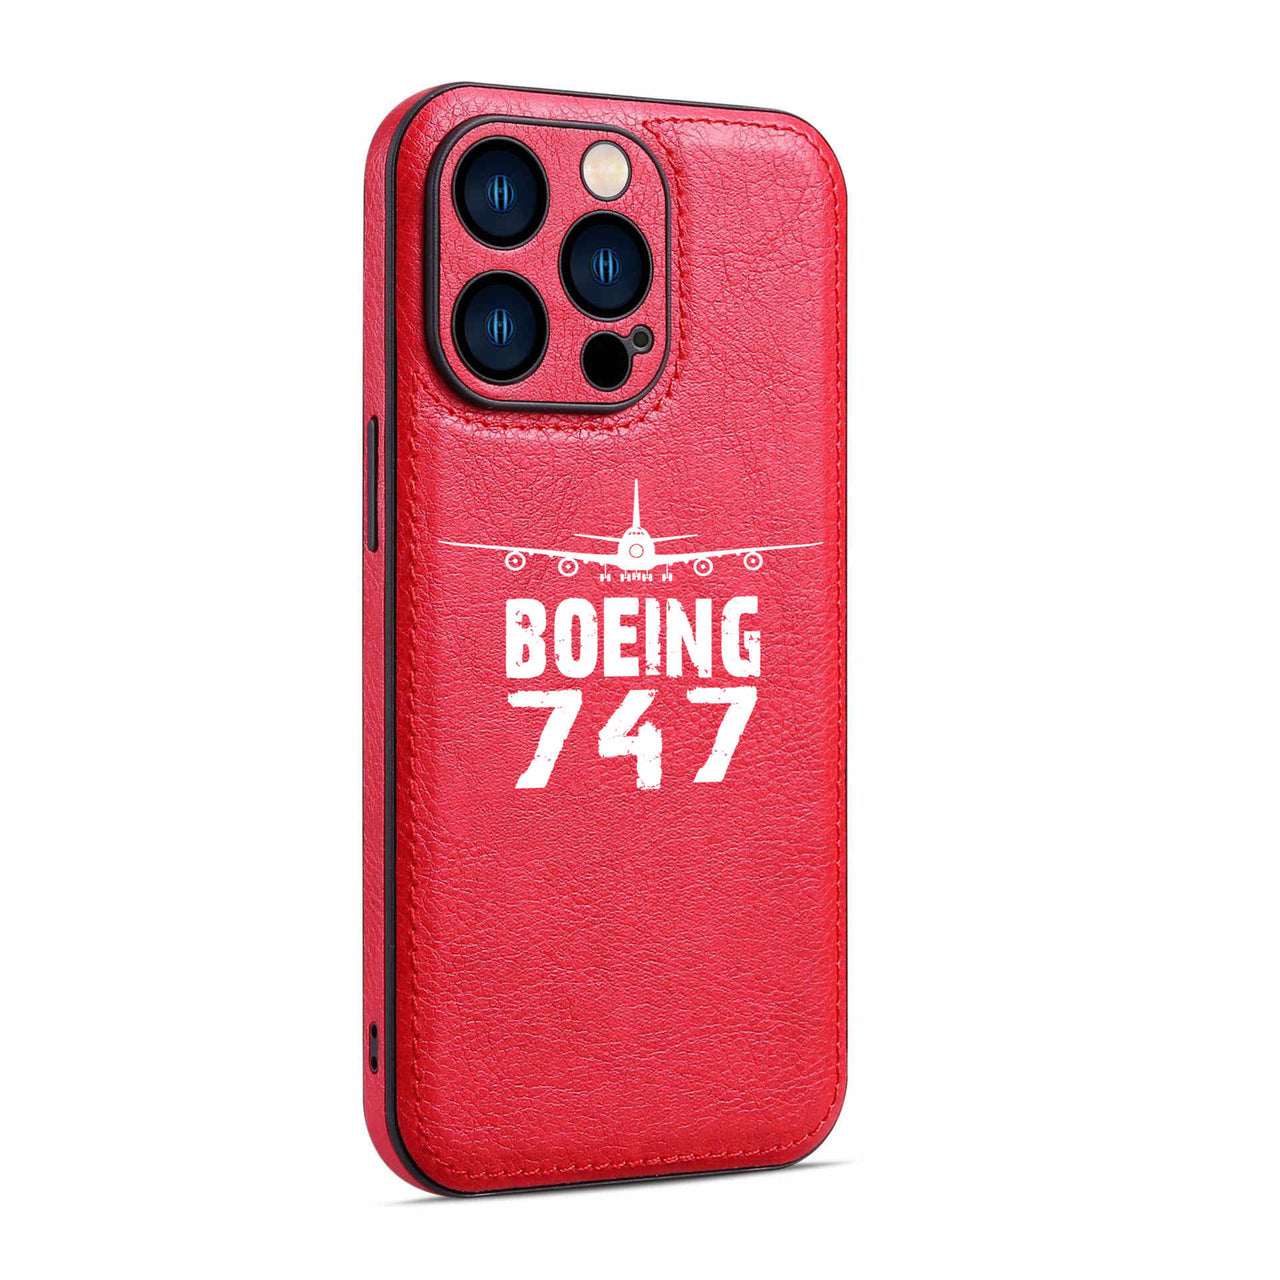 Boeing 747 & Plane Designed Leather iPhone Cases